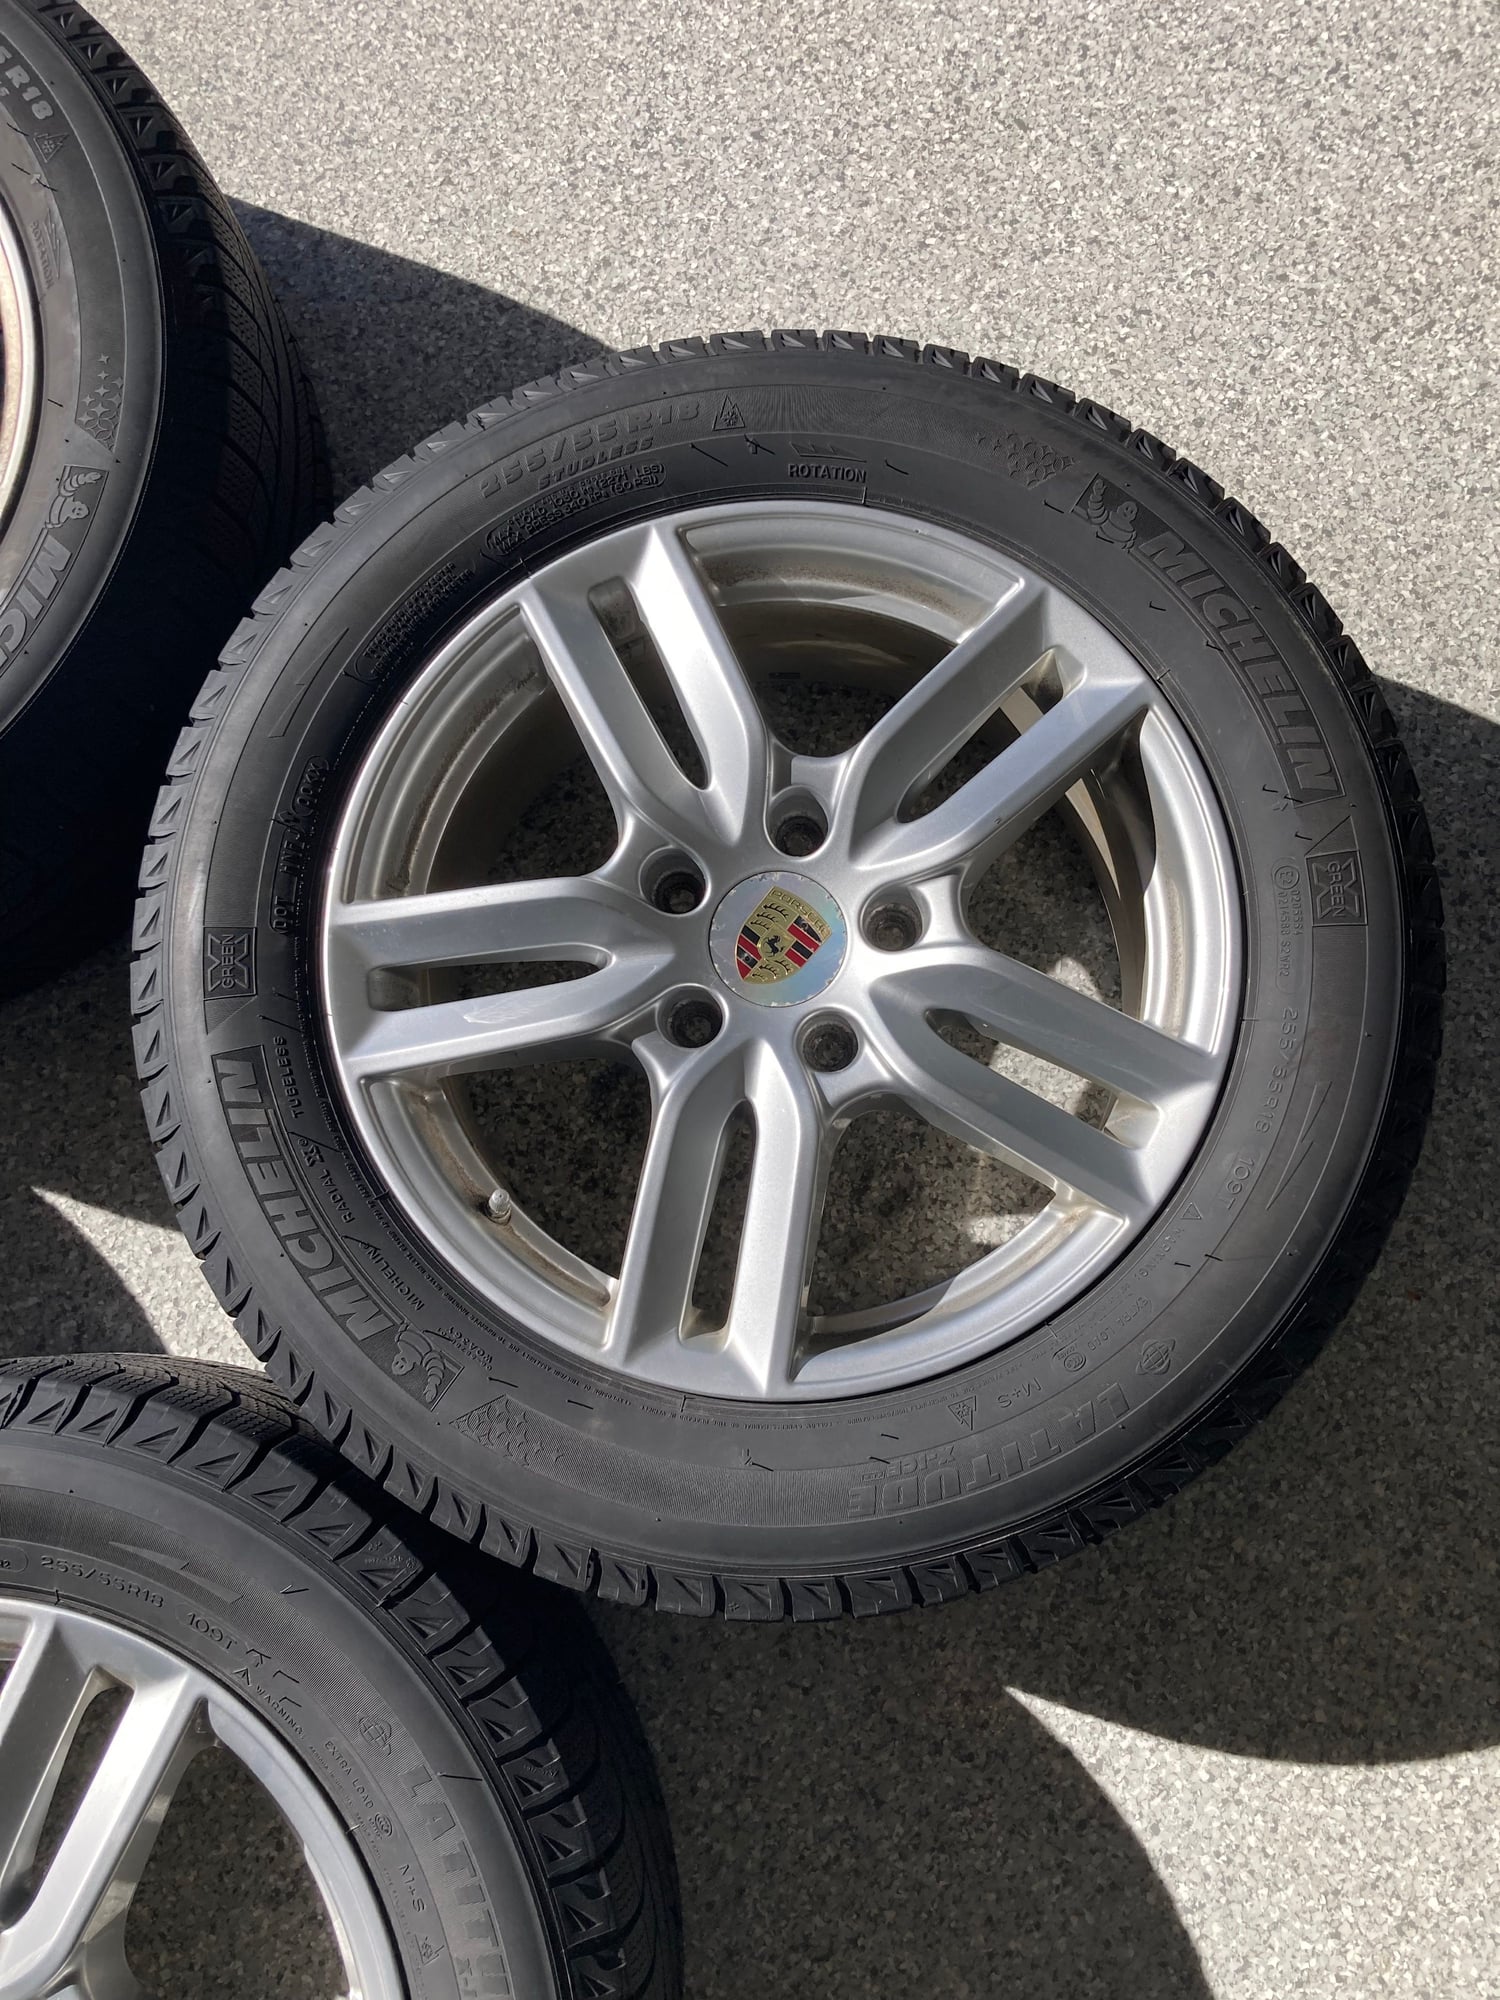 Wheels and Tires/Axles - Winter wheels/tires Cayenne - Used - 2011 to 2018 Porsche Cayenne - Oakville, ON L6K0H3, Canada